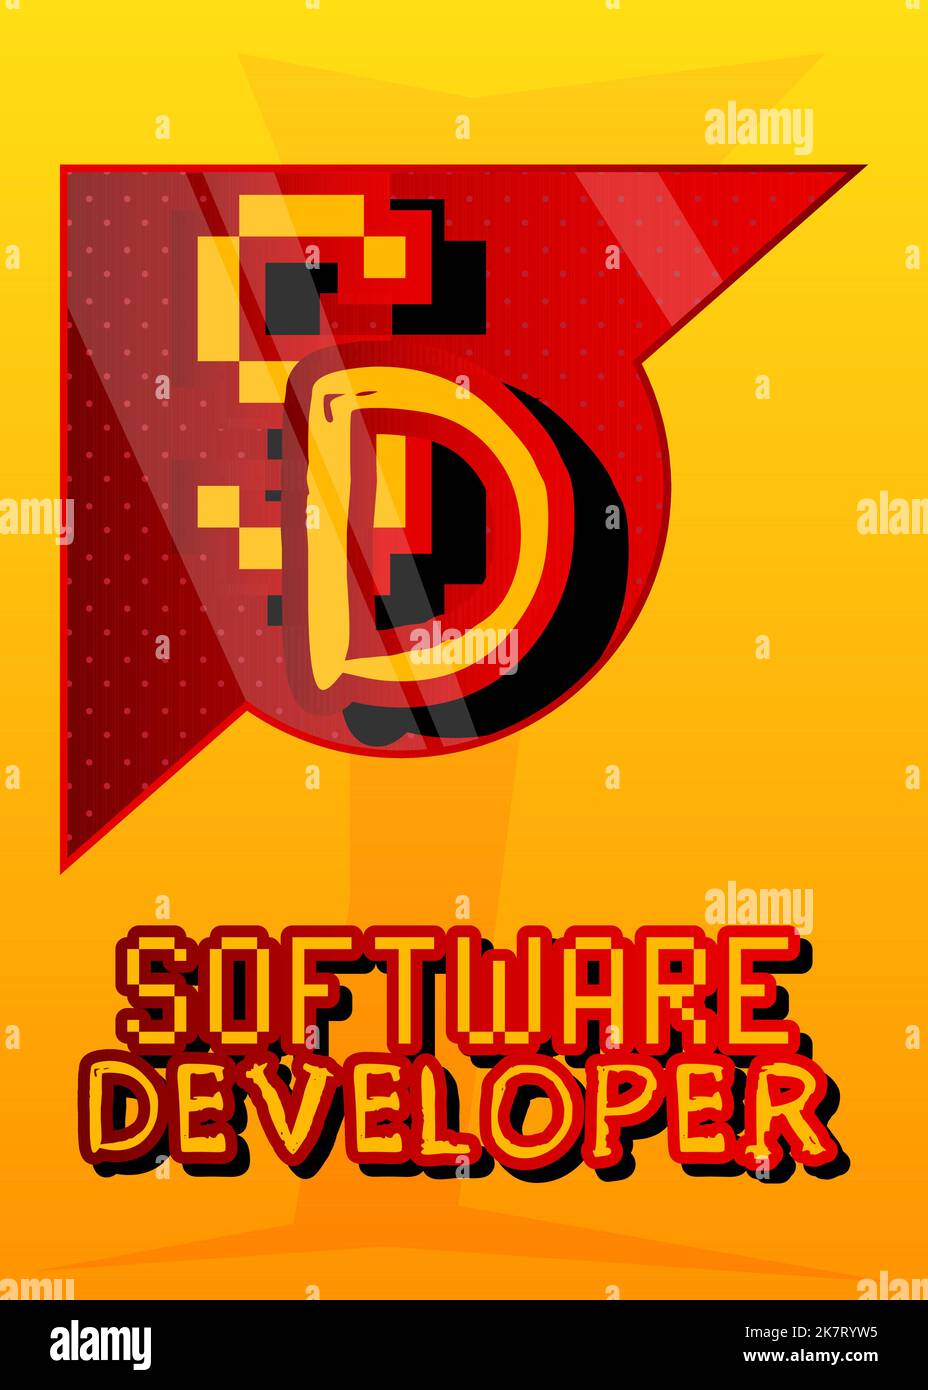 Superhero coat of arms showing Software Developer icon. Colorful comic book style vector illustration. Stock Vector